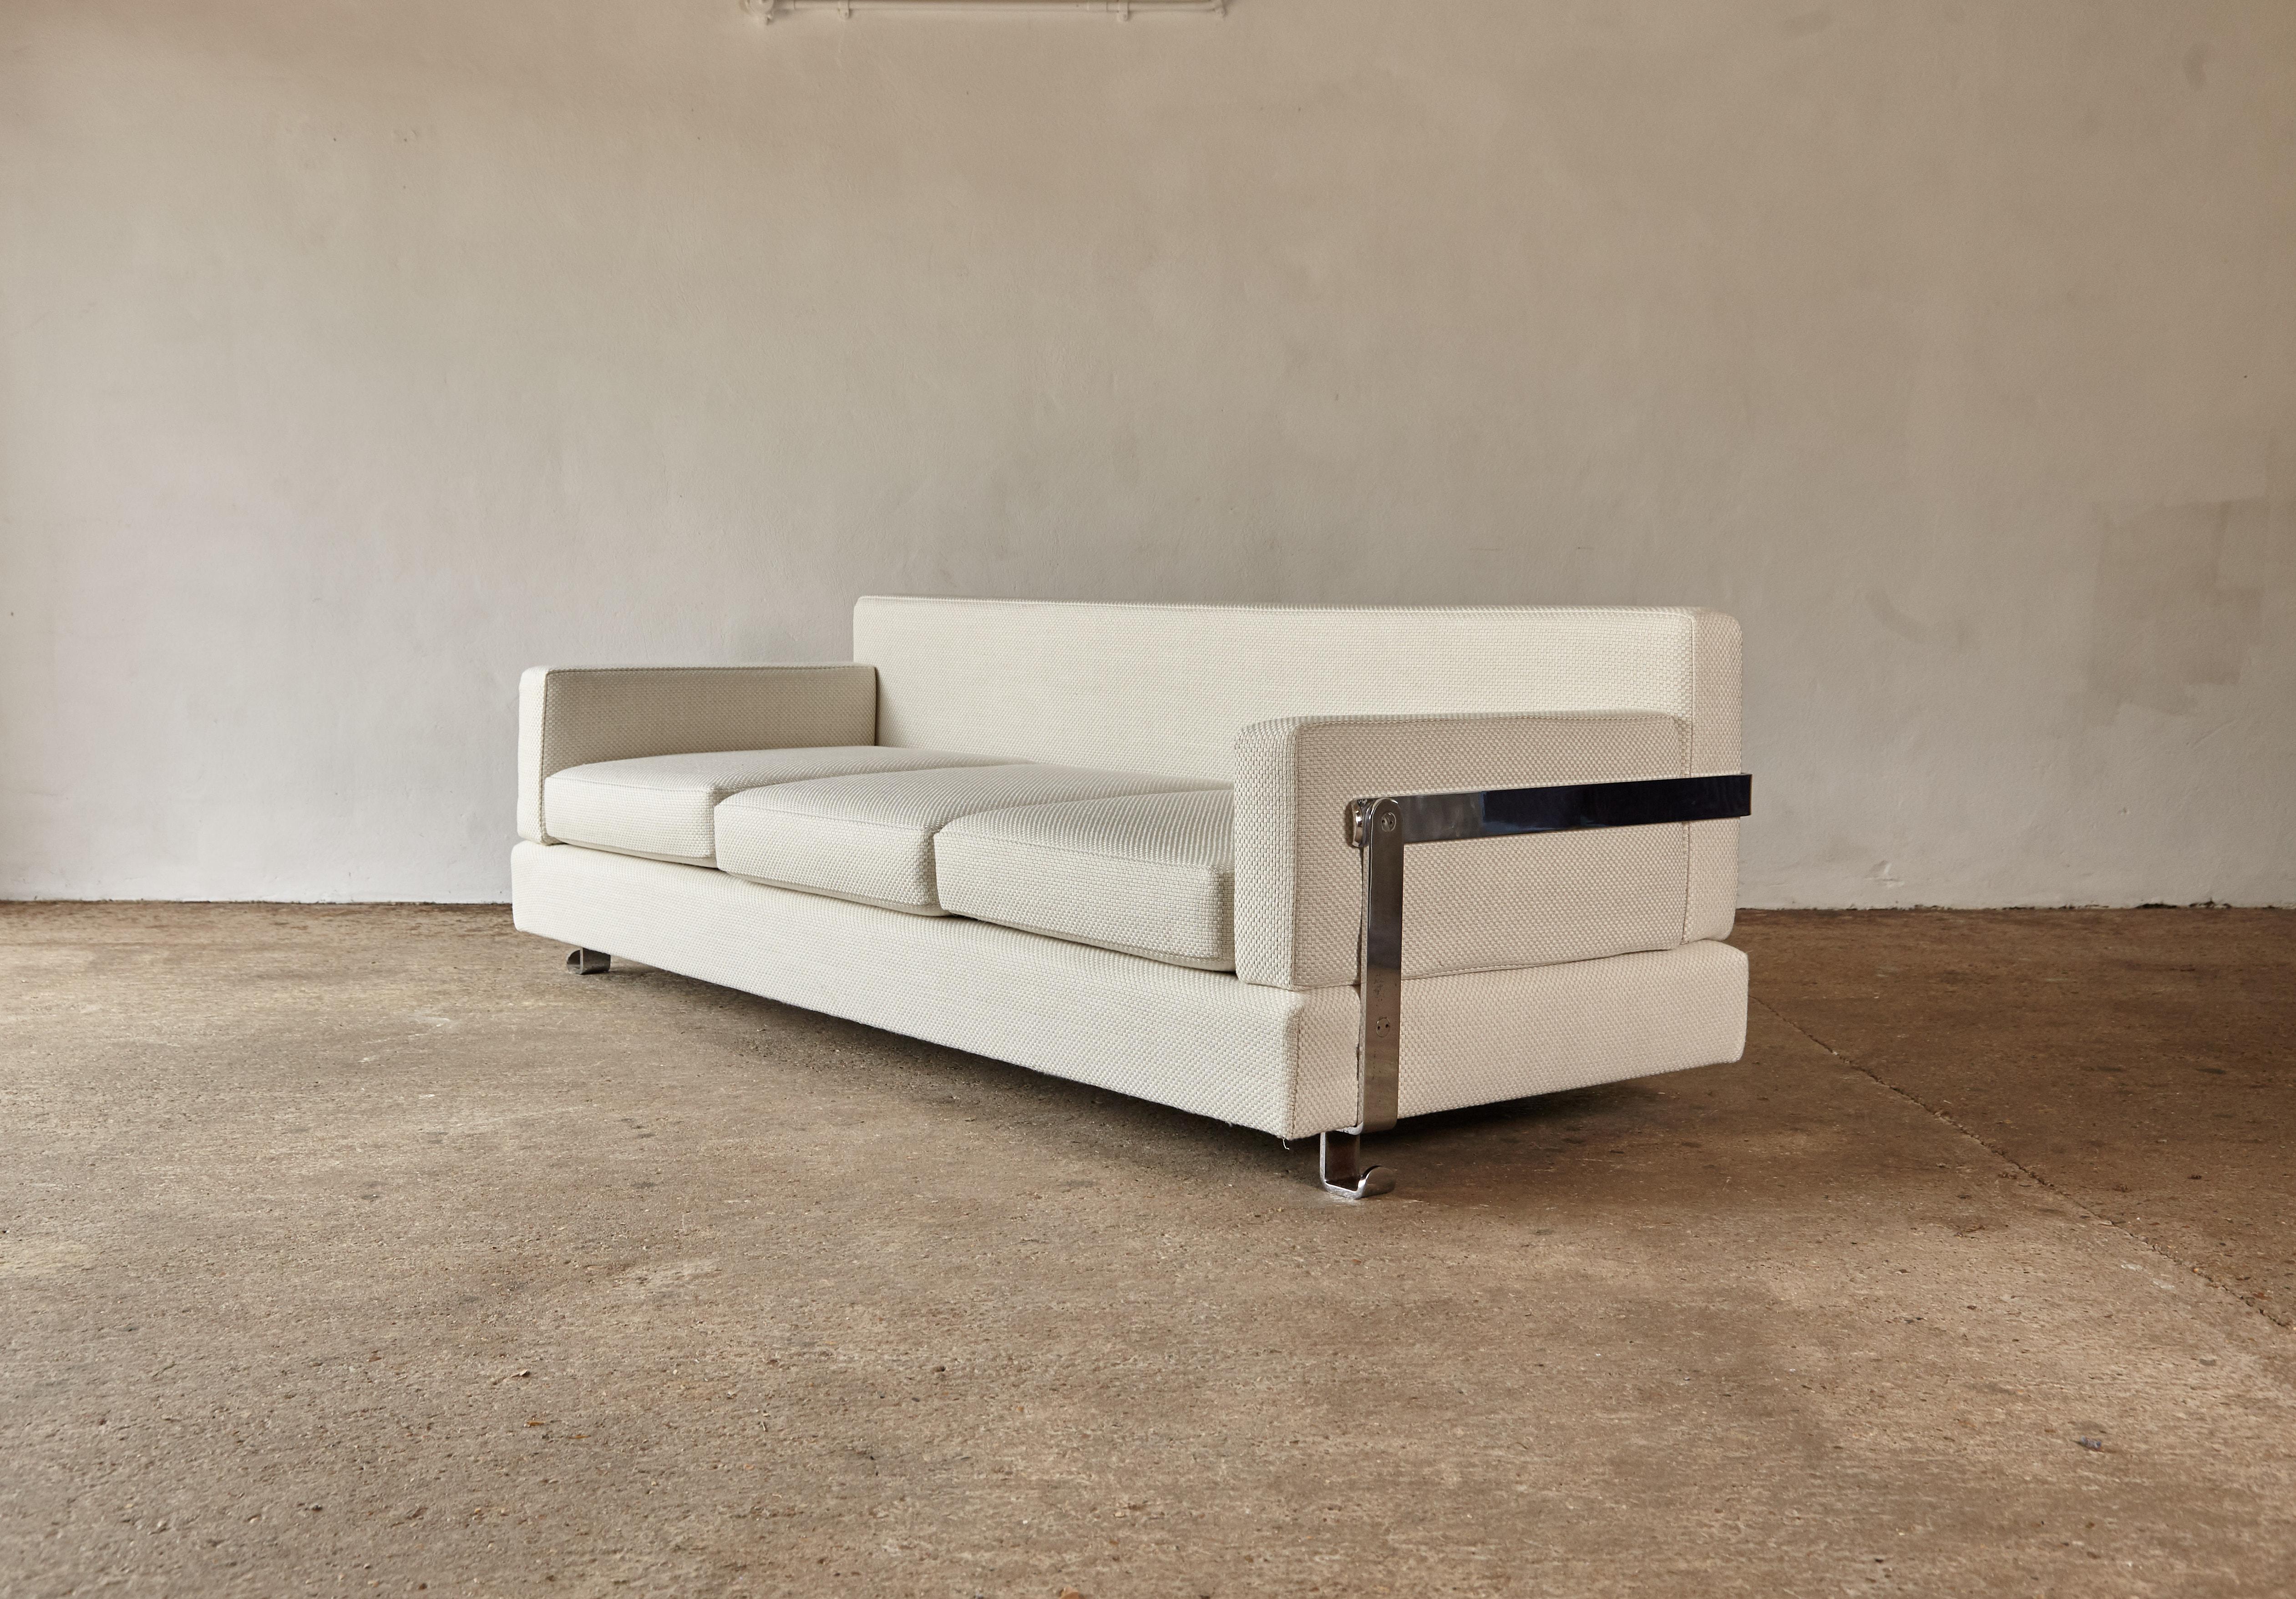 An original Luigi Caccia Dominioni Fasce Cromate (or Chromate) sofa, model P11, manufactured by Azucena in Italy, in the 1960s. Chrome-plated steel, newly upholstered in an ivory Lelievre fabric.   Fast shipping worldwide.